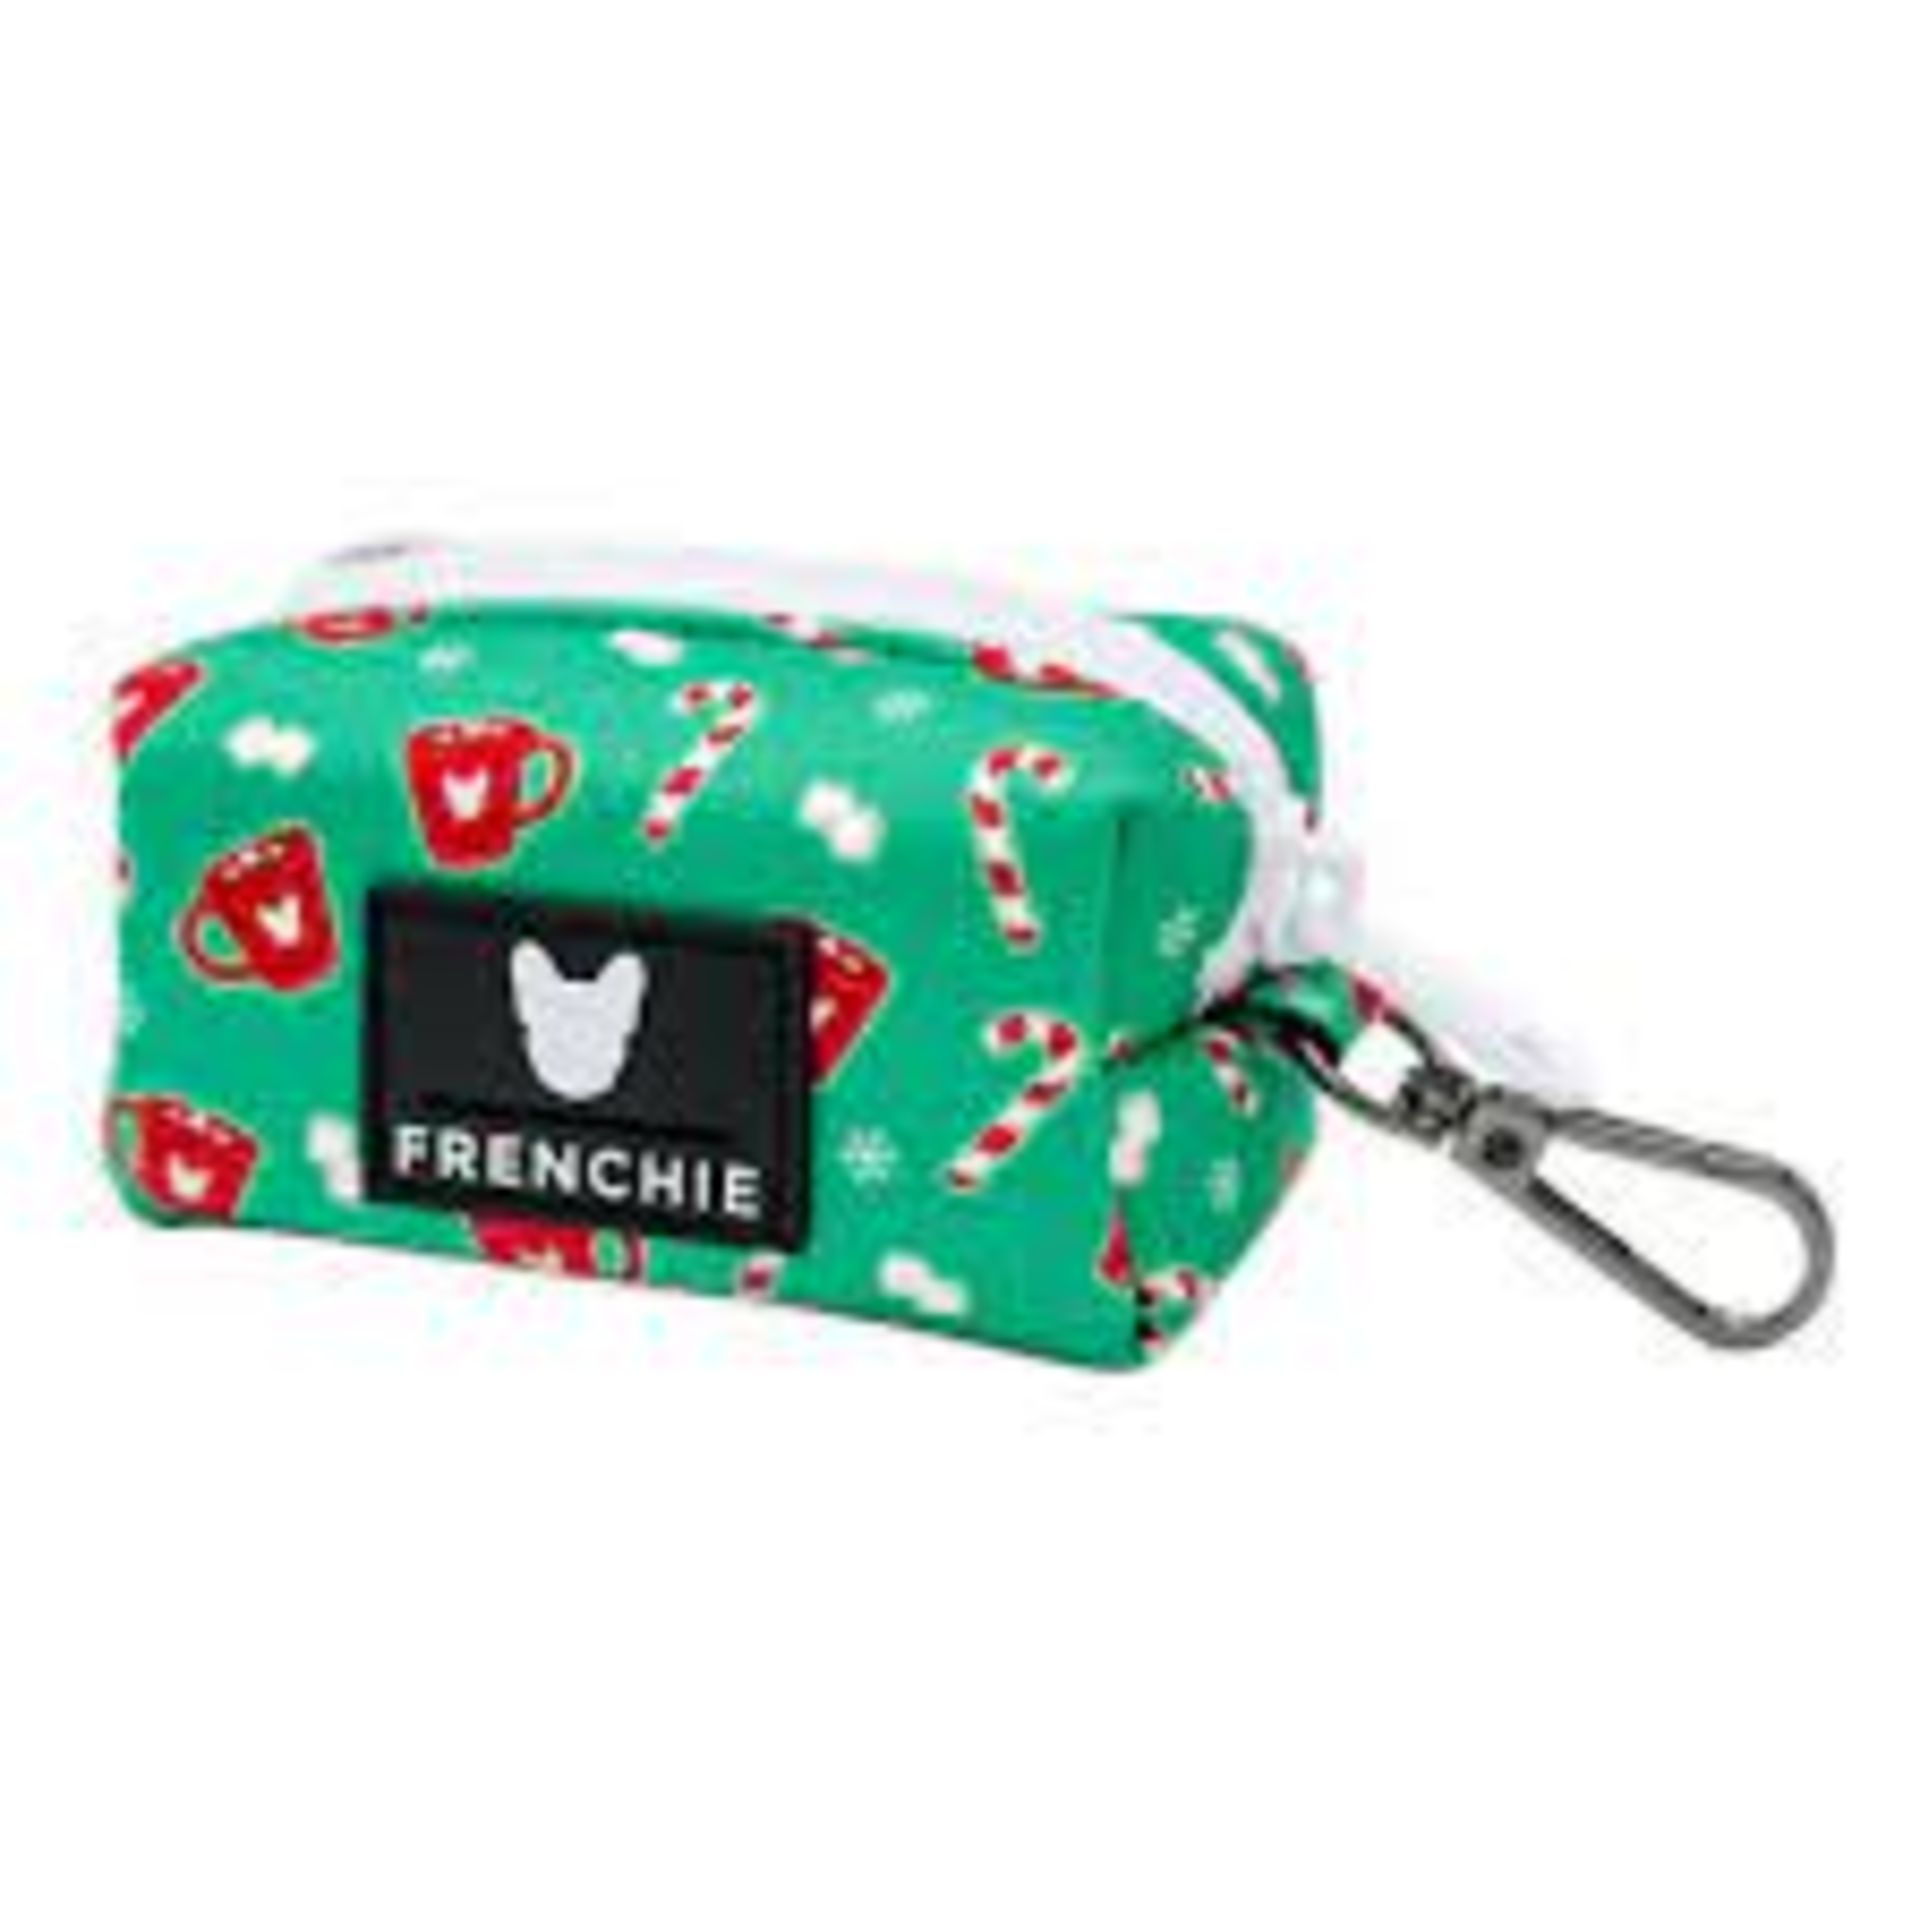 Bulk Trade Lot 500 X New .Packaged Frenchie The Bulldog Luxury Branded Dog Products. May include - Image 23 of 50